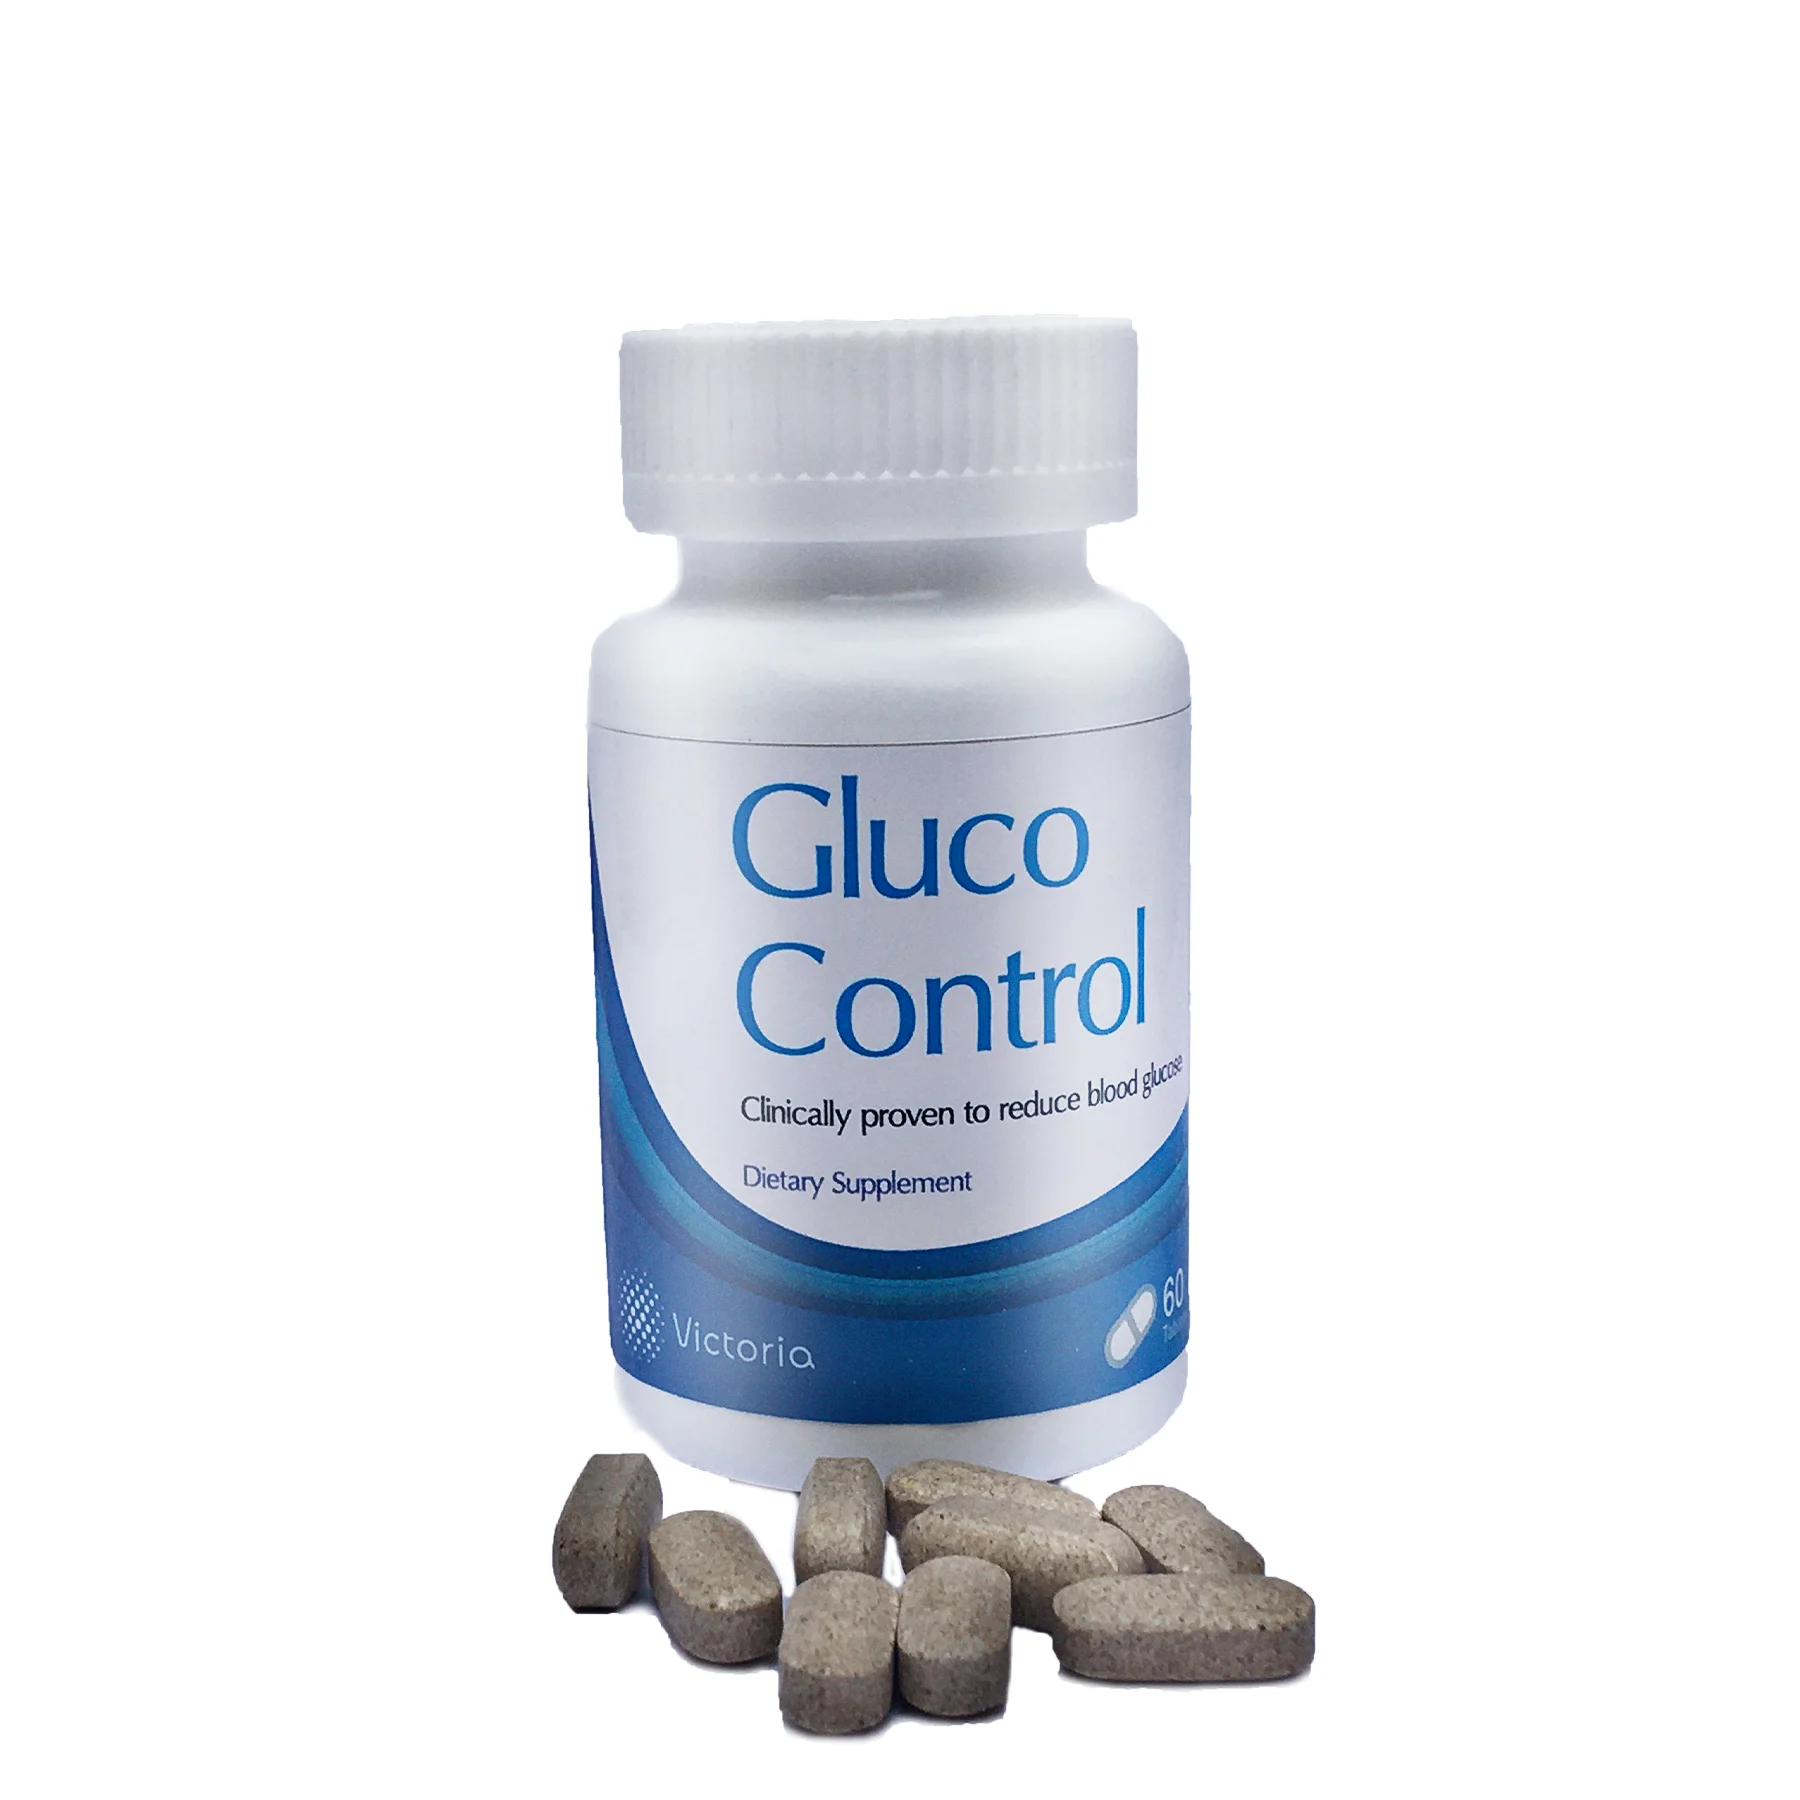 Healthcare product Natural Ingredients Gluco Control 60 tablets-Helps control glucose in the blood-